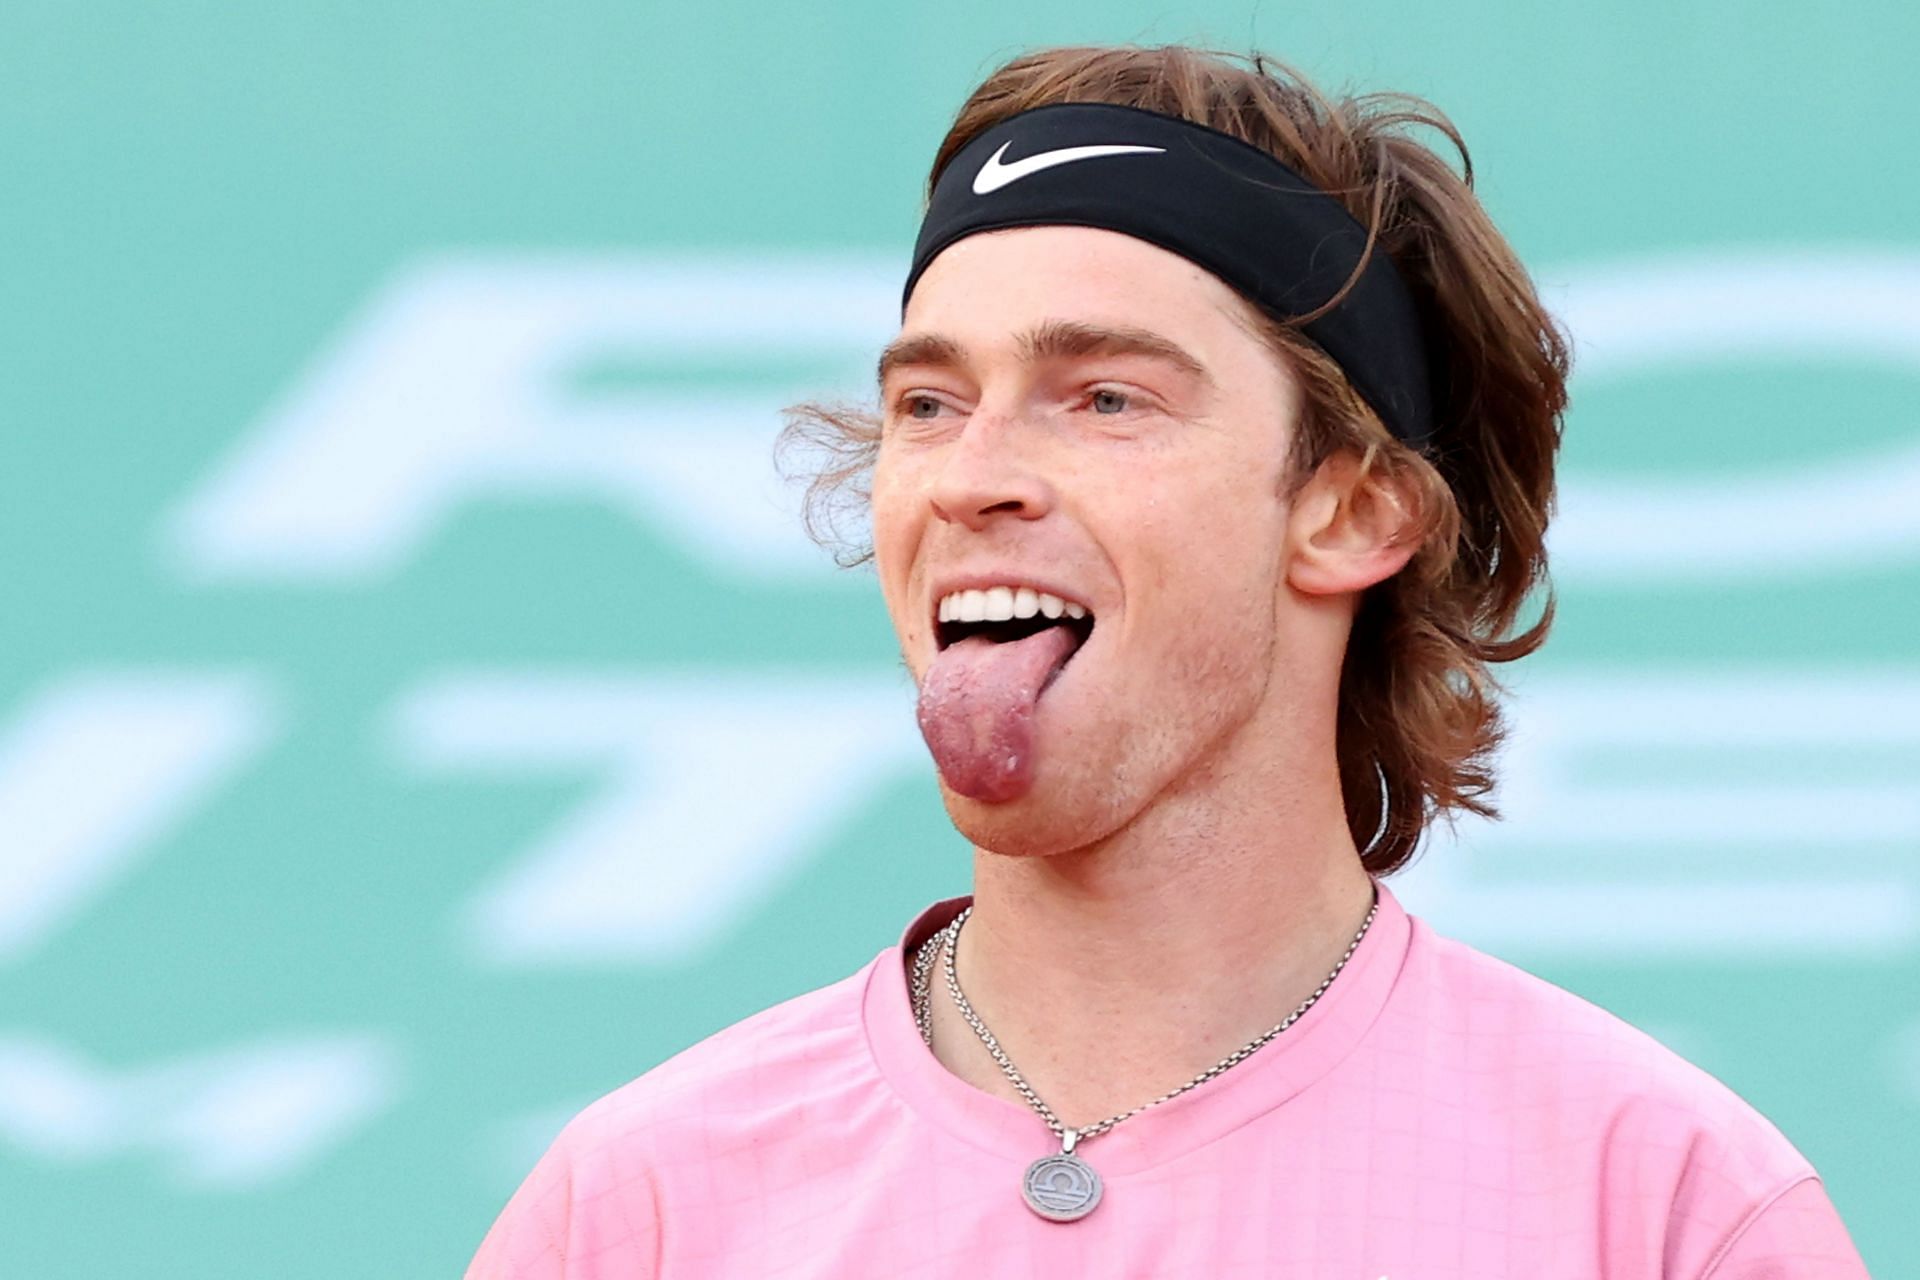 Andrey Rublev&#039;s humor further endears the World No. 7 to fans.